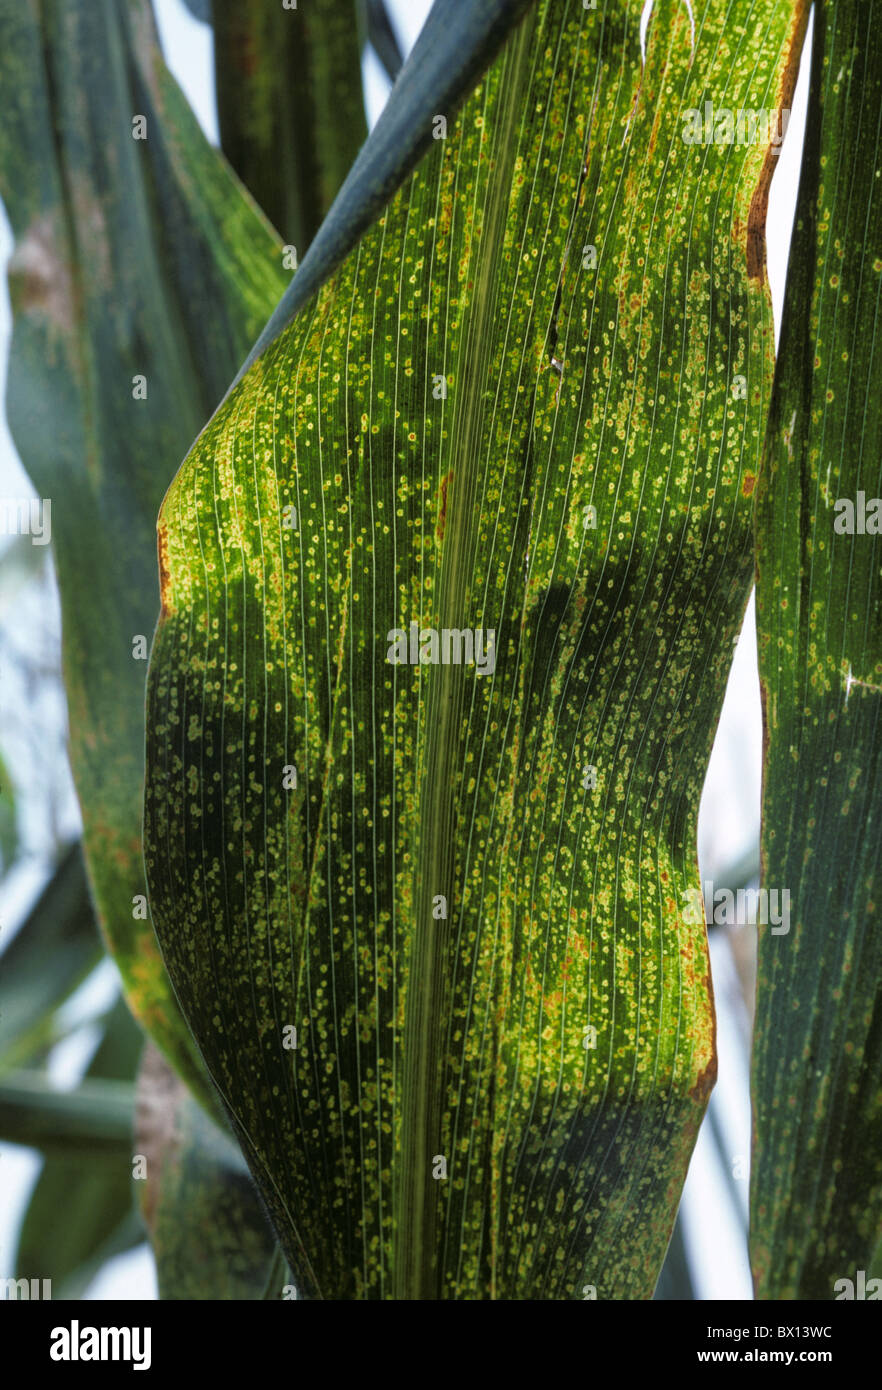 Maize eyespot (Kabatiella zeae) lesions on maize or corn leaves Stock Photo